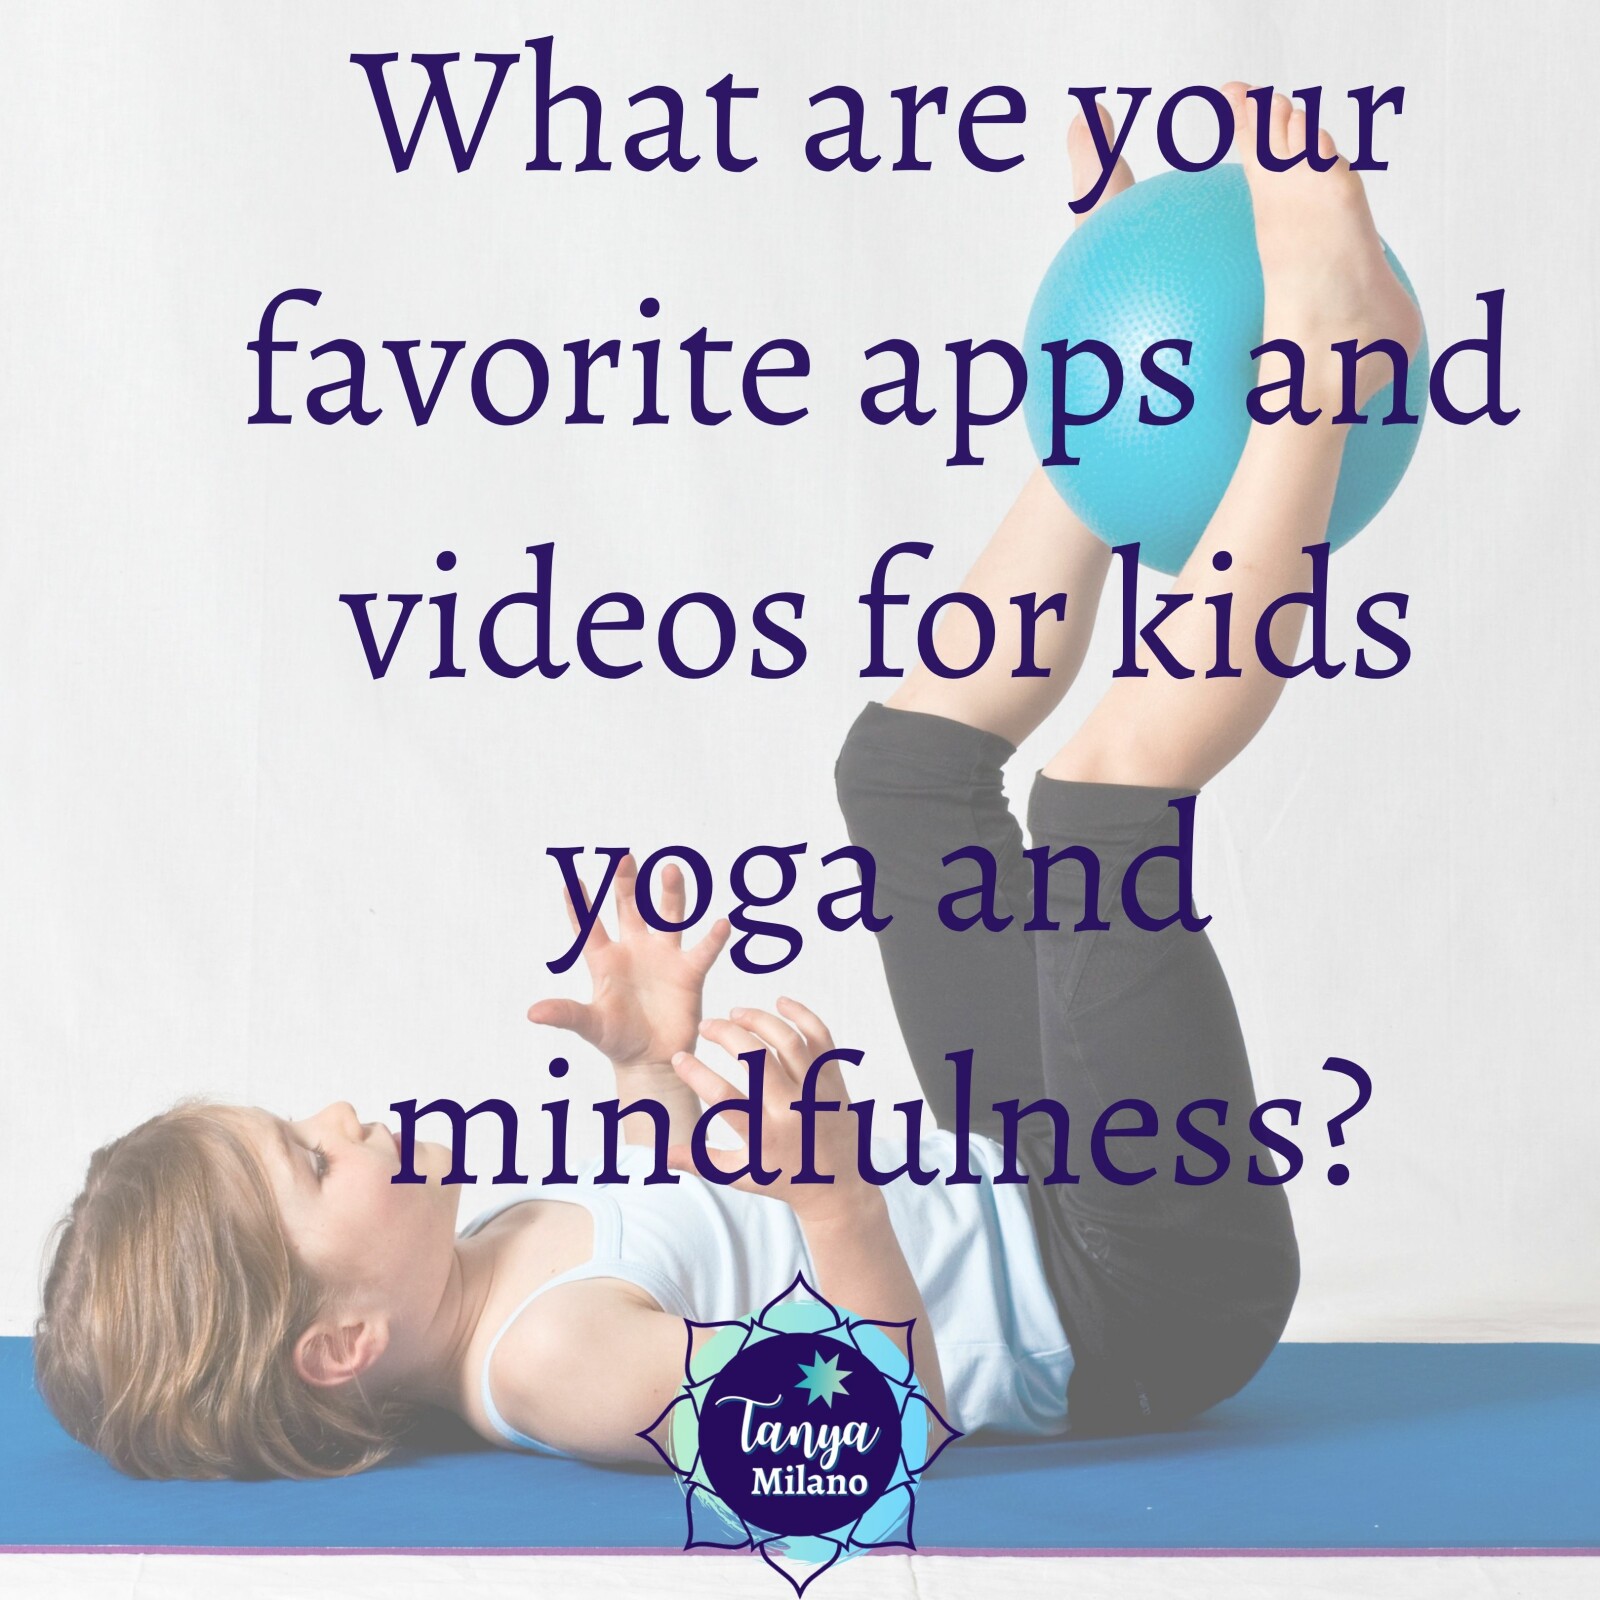 My Favorite apps and Youtube Channels to help kids with anxiety and BIG emotions